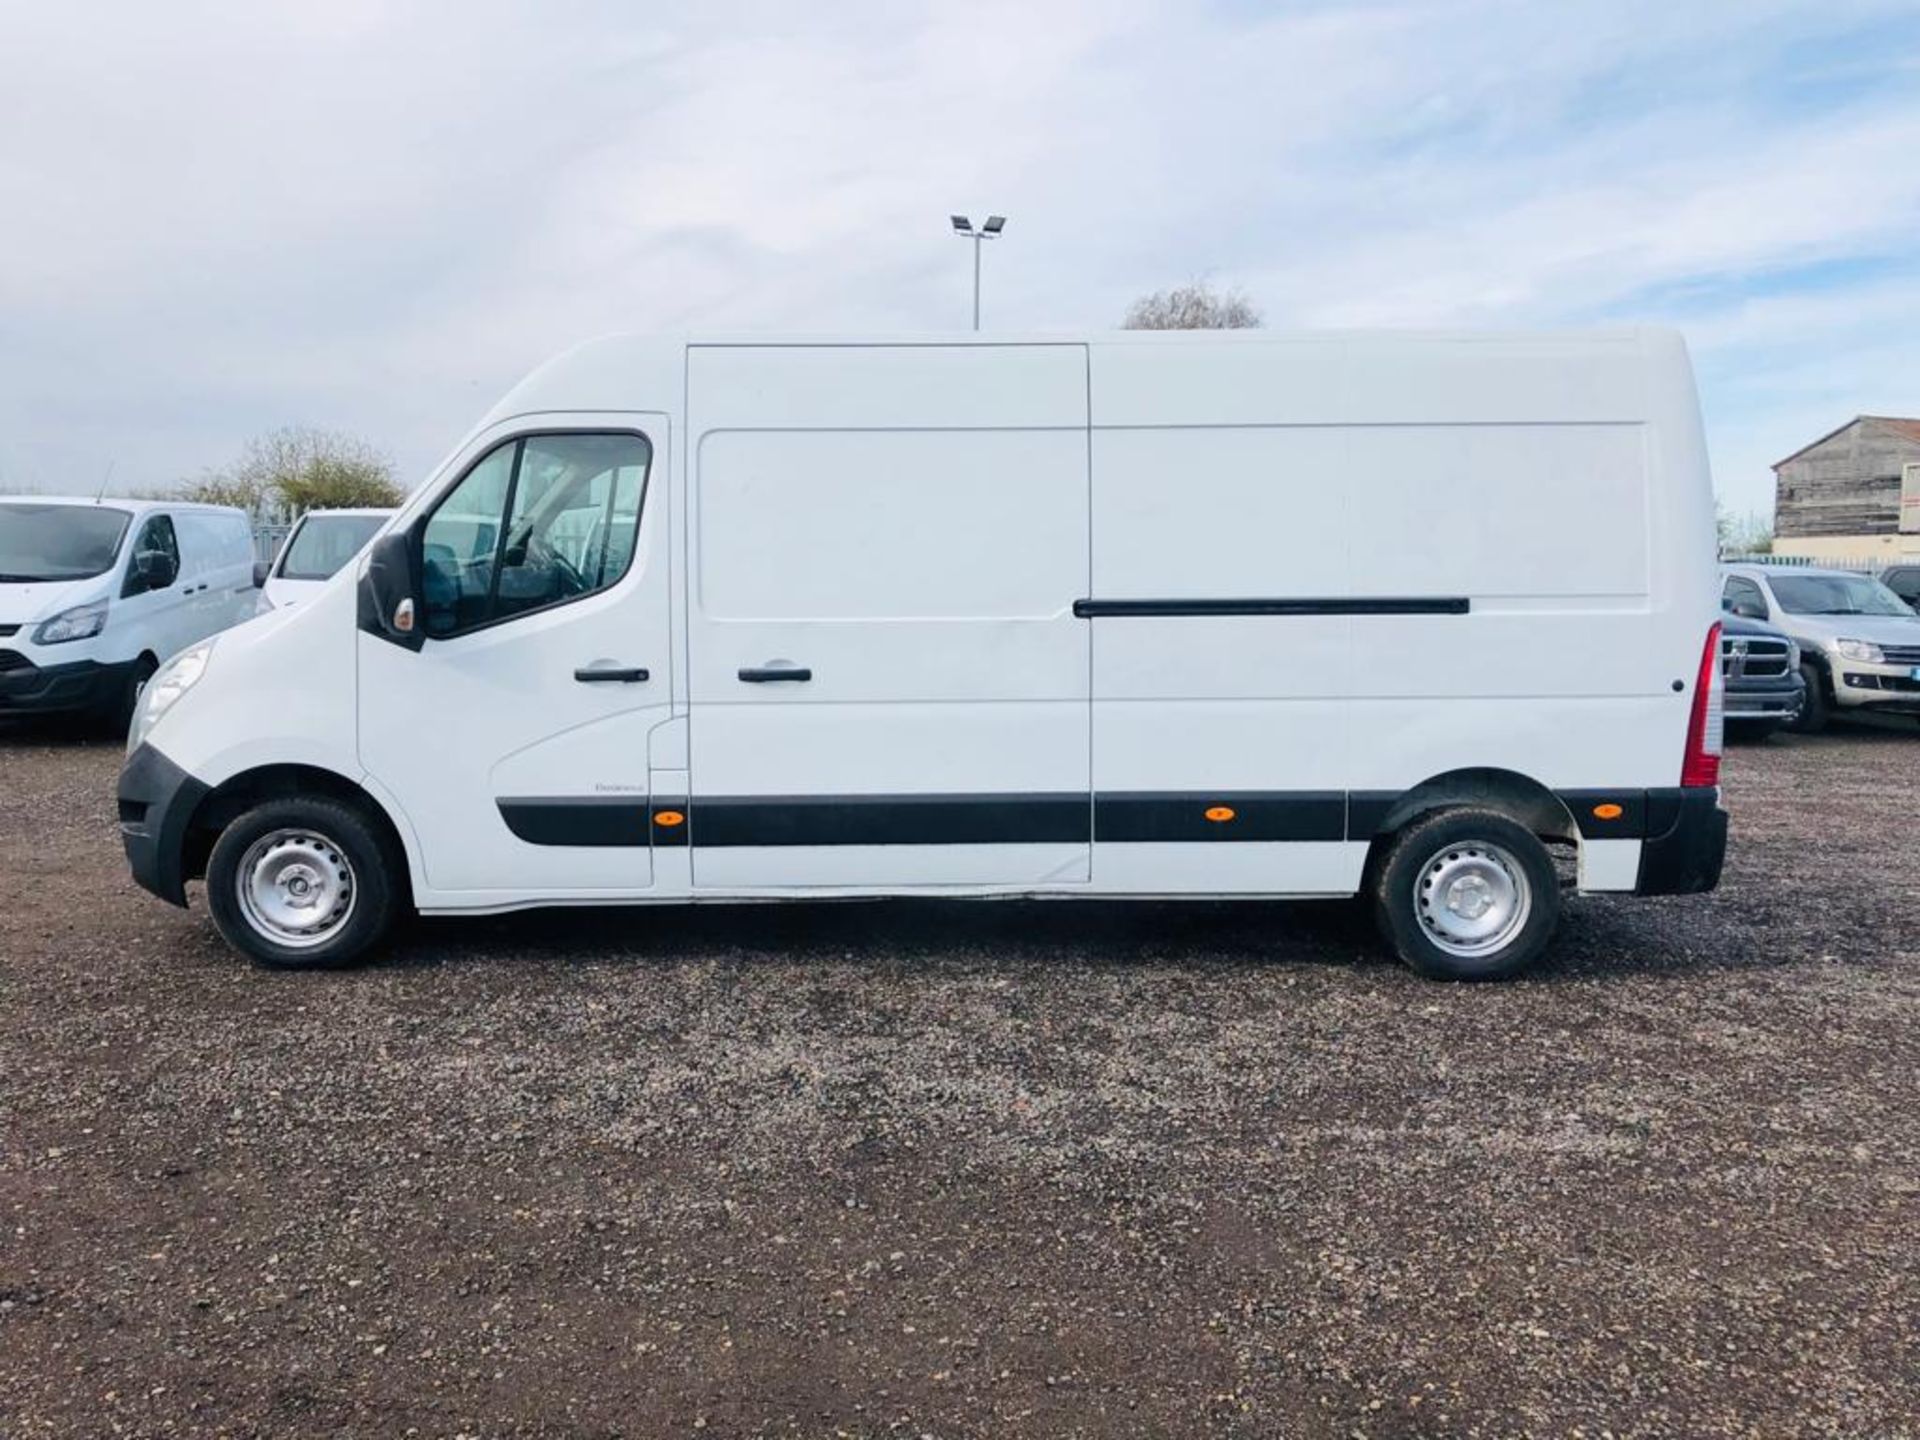 Renault Master 2.3 DCI 110 Business LM35 L3 H2 2016 '16 reg' Fridge/Freezer - Fully Insulated - Image 4 of 28